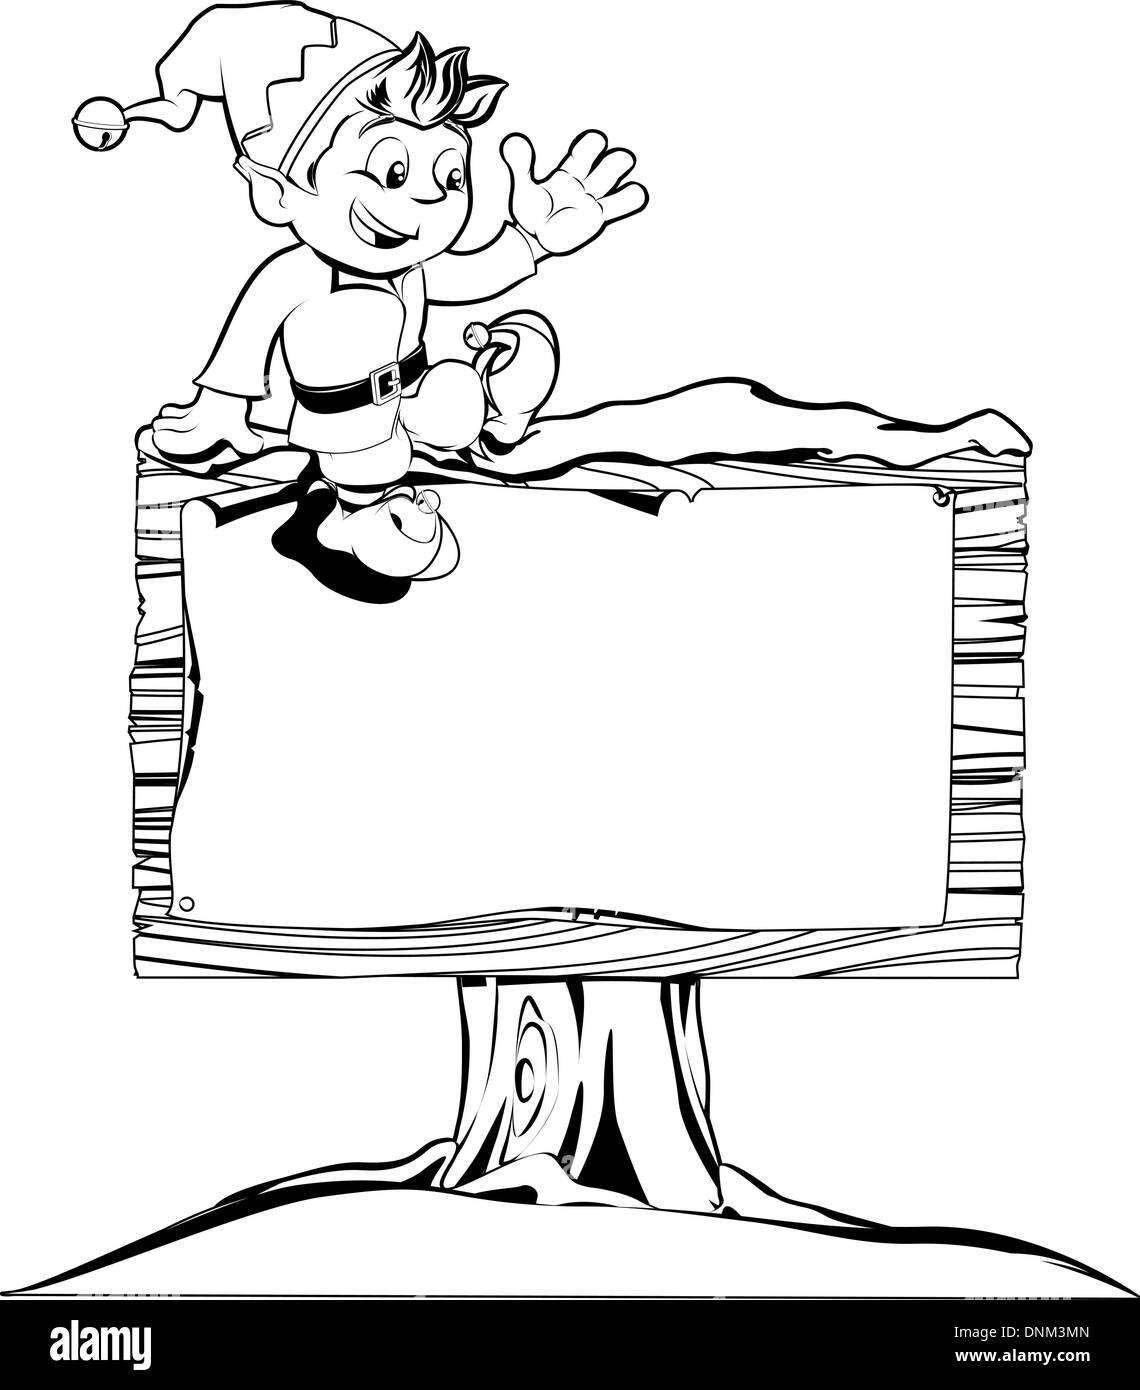 Drawing of a happy Christmas elf on sitting on a sign Stock Vector